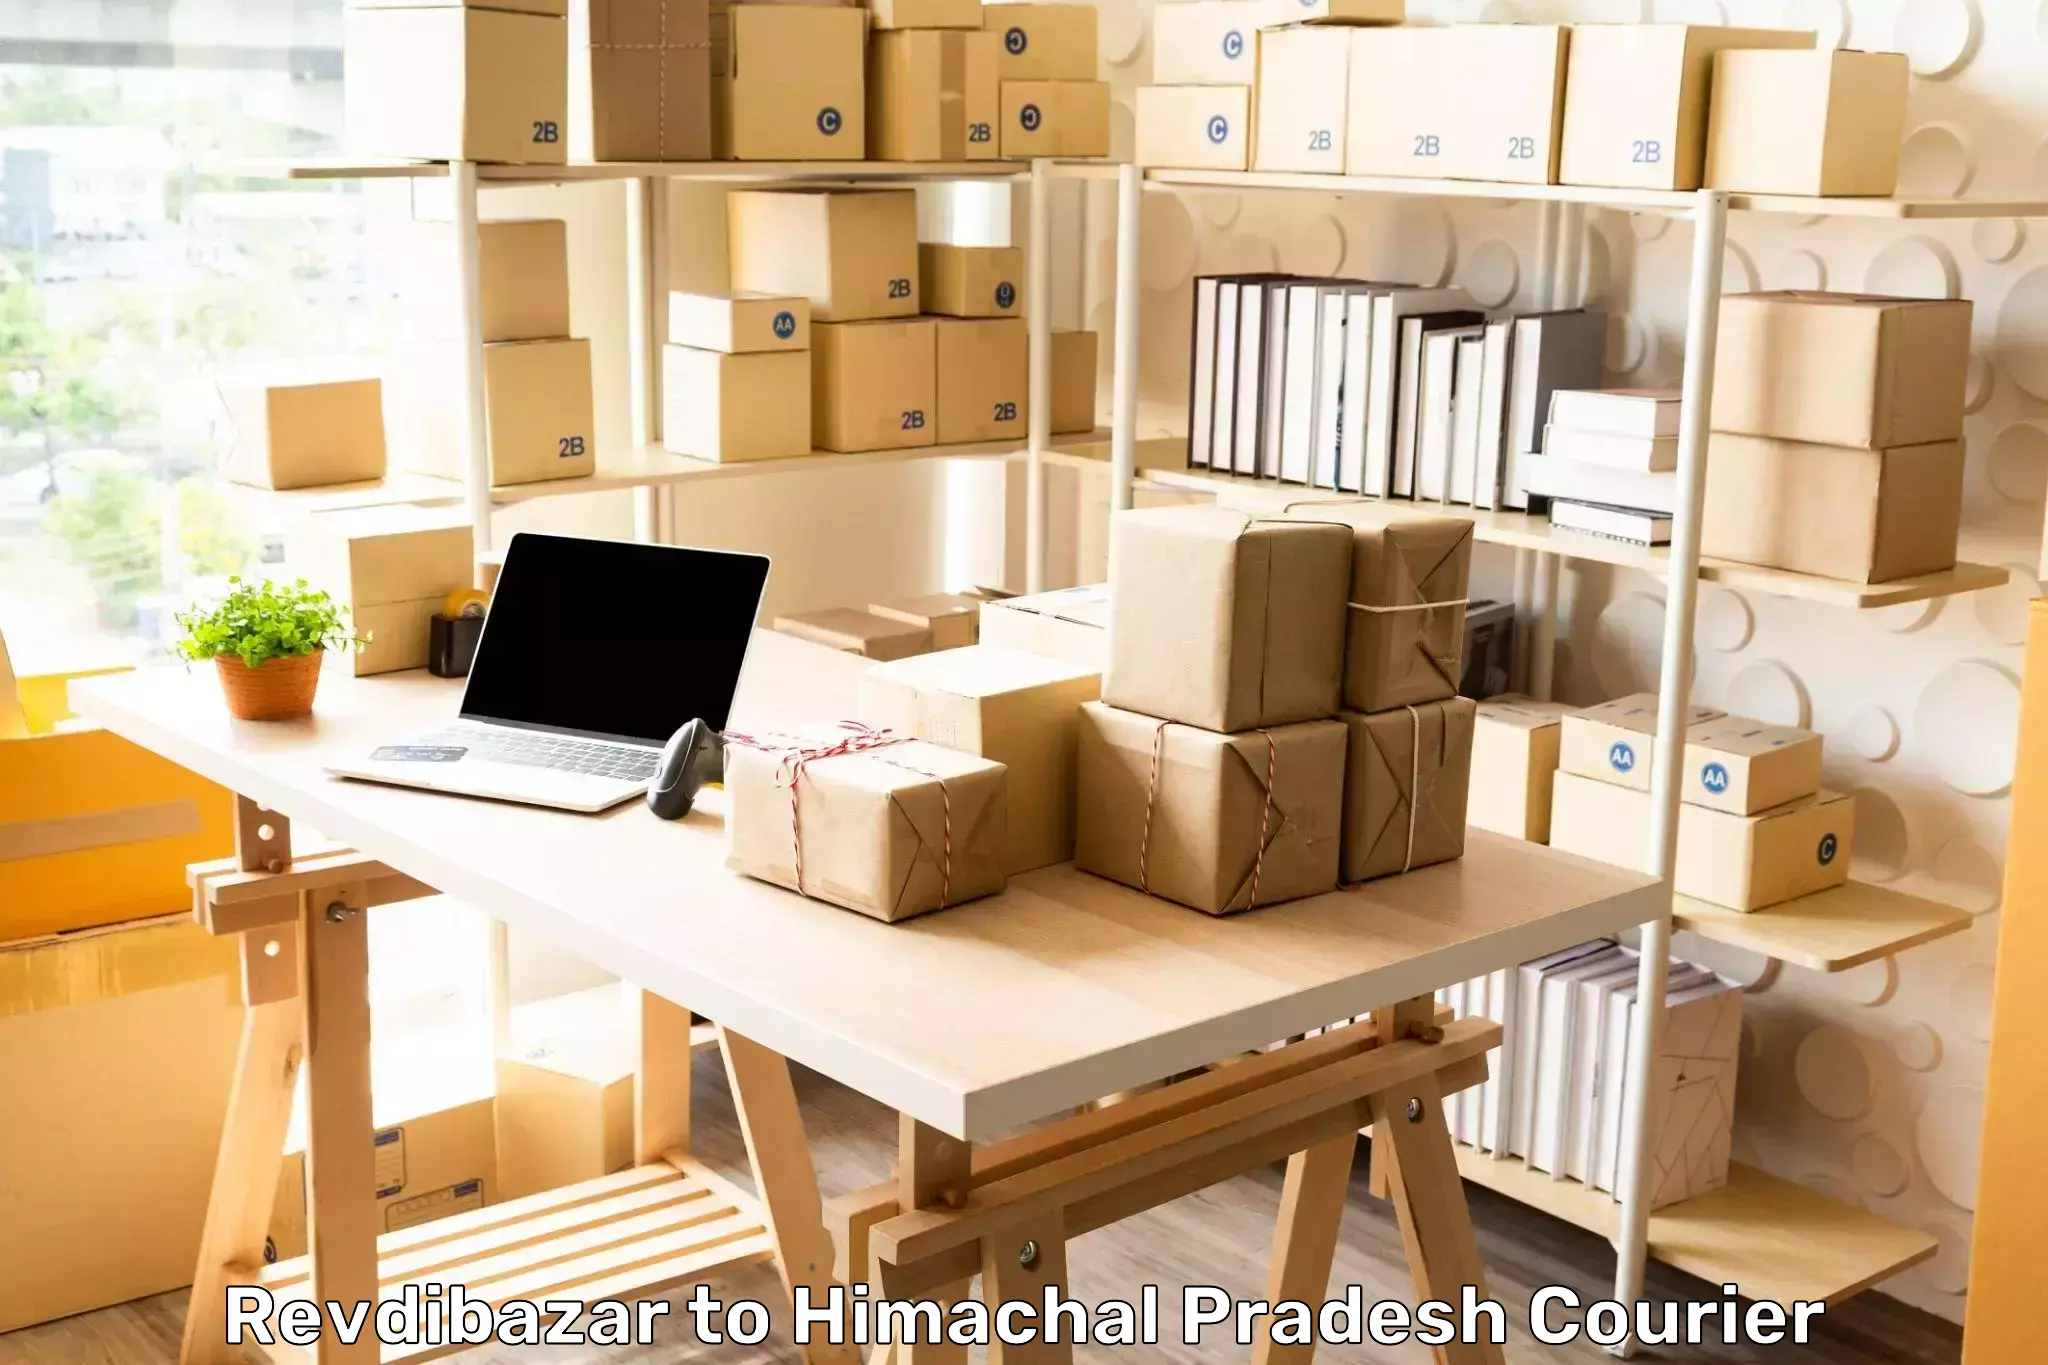 Large package courier Revdibazar to Himachal Pradesh